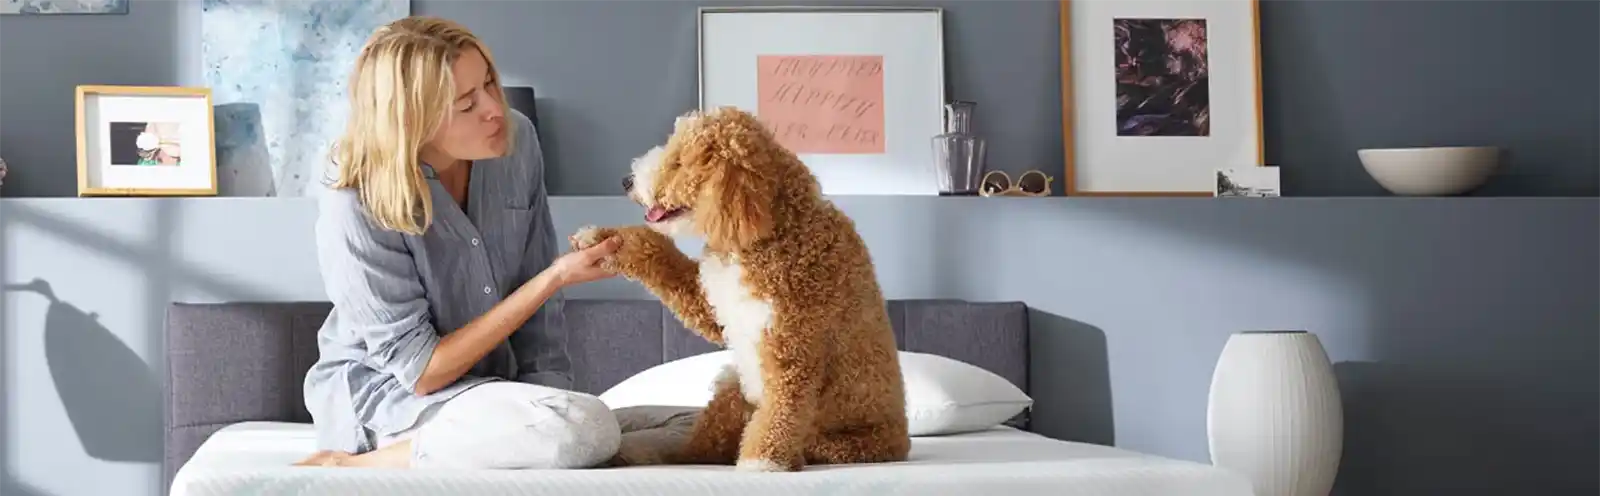 tempur-pedic featured woman and dog on bed